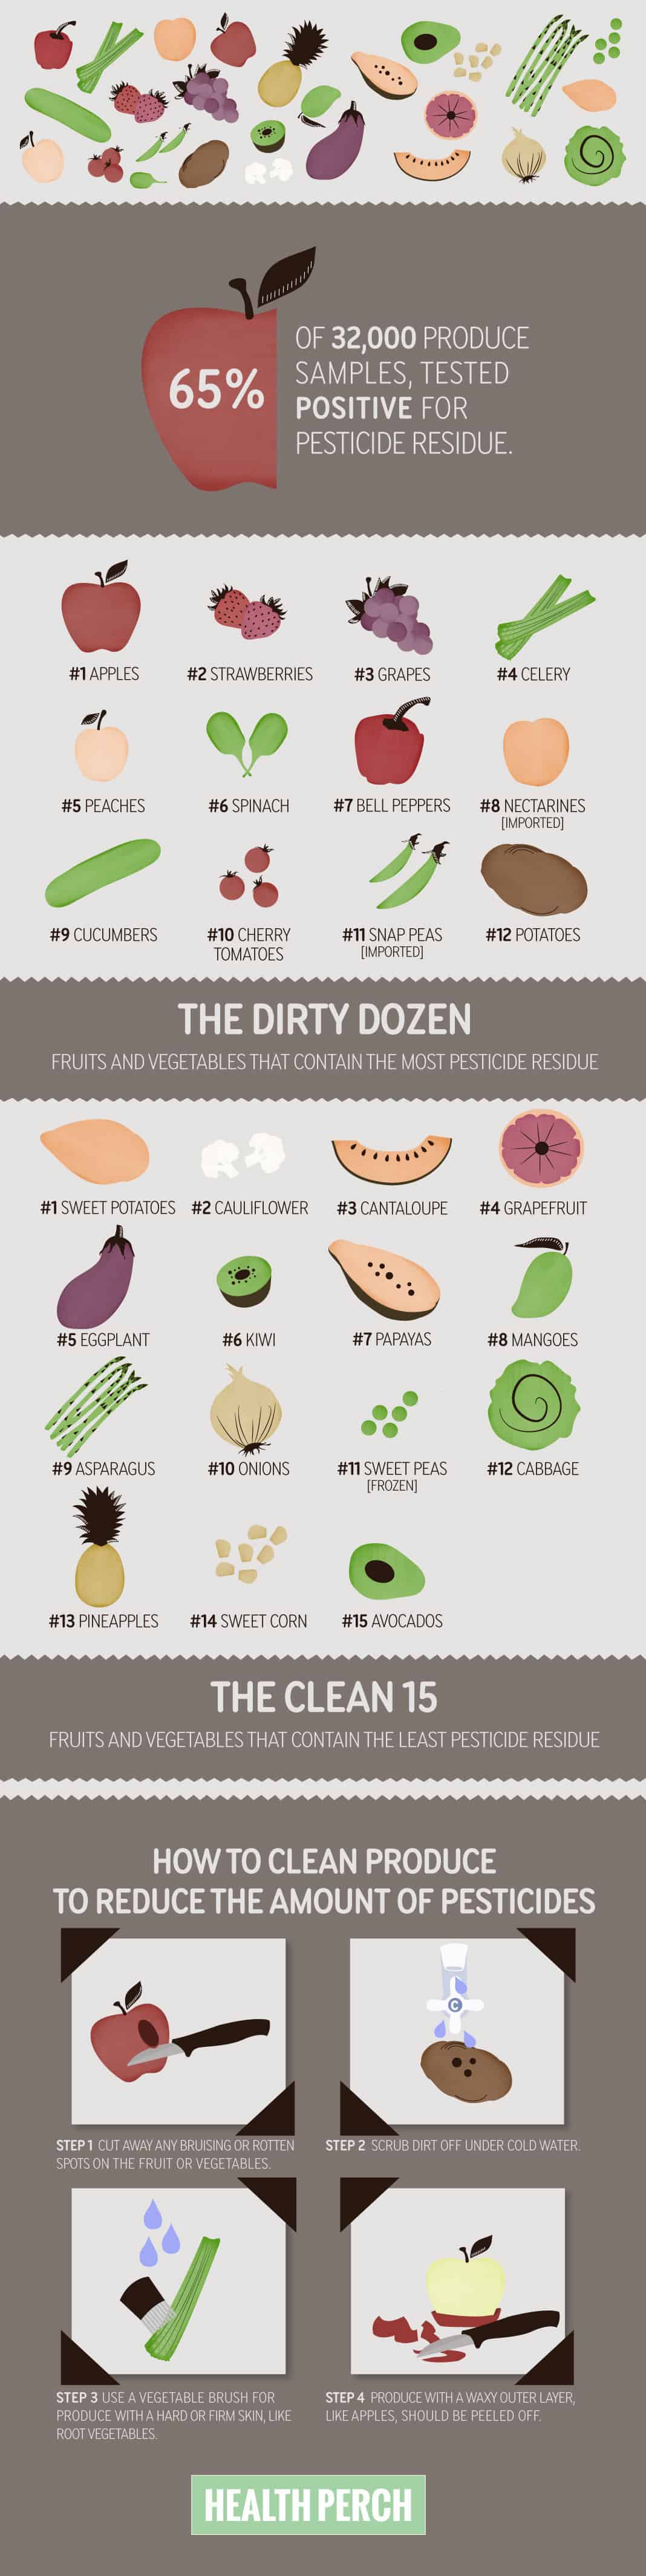 The Dirty Dozen and Clean 15 2014 Produce Lists